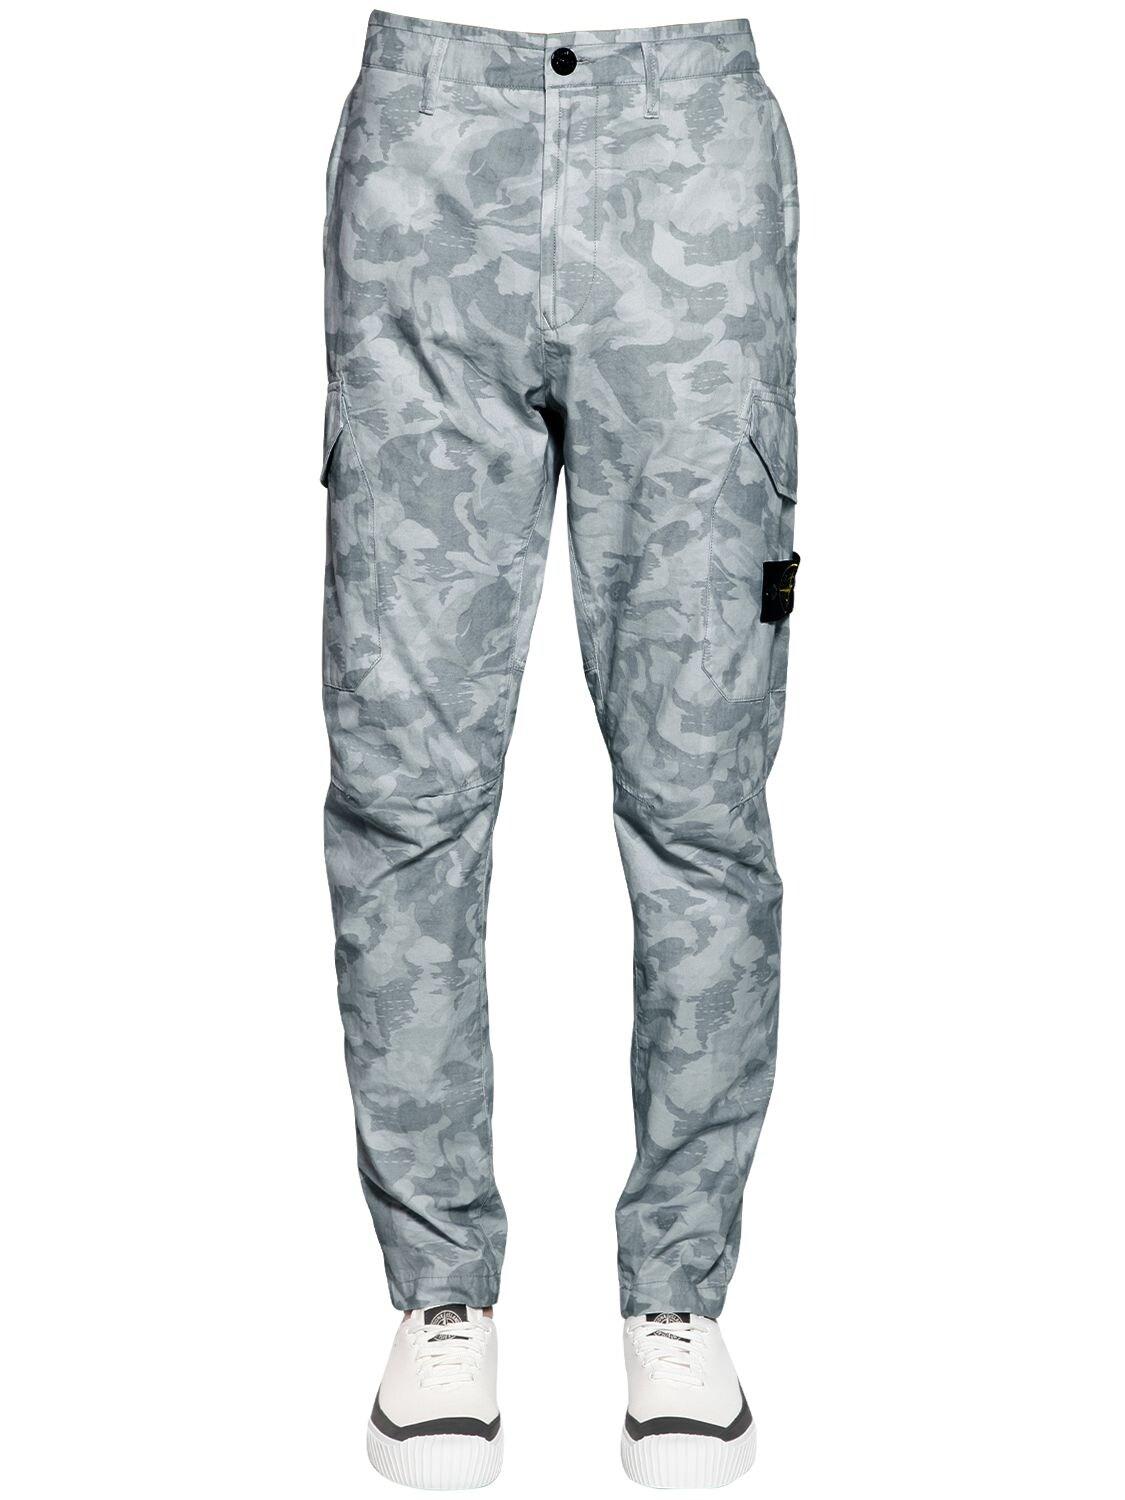 Stone Island Camouflage Cotton Cargo Pants in Sky Camo (Blue) for Men ...